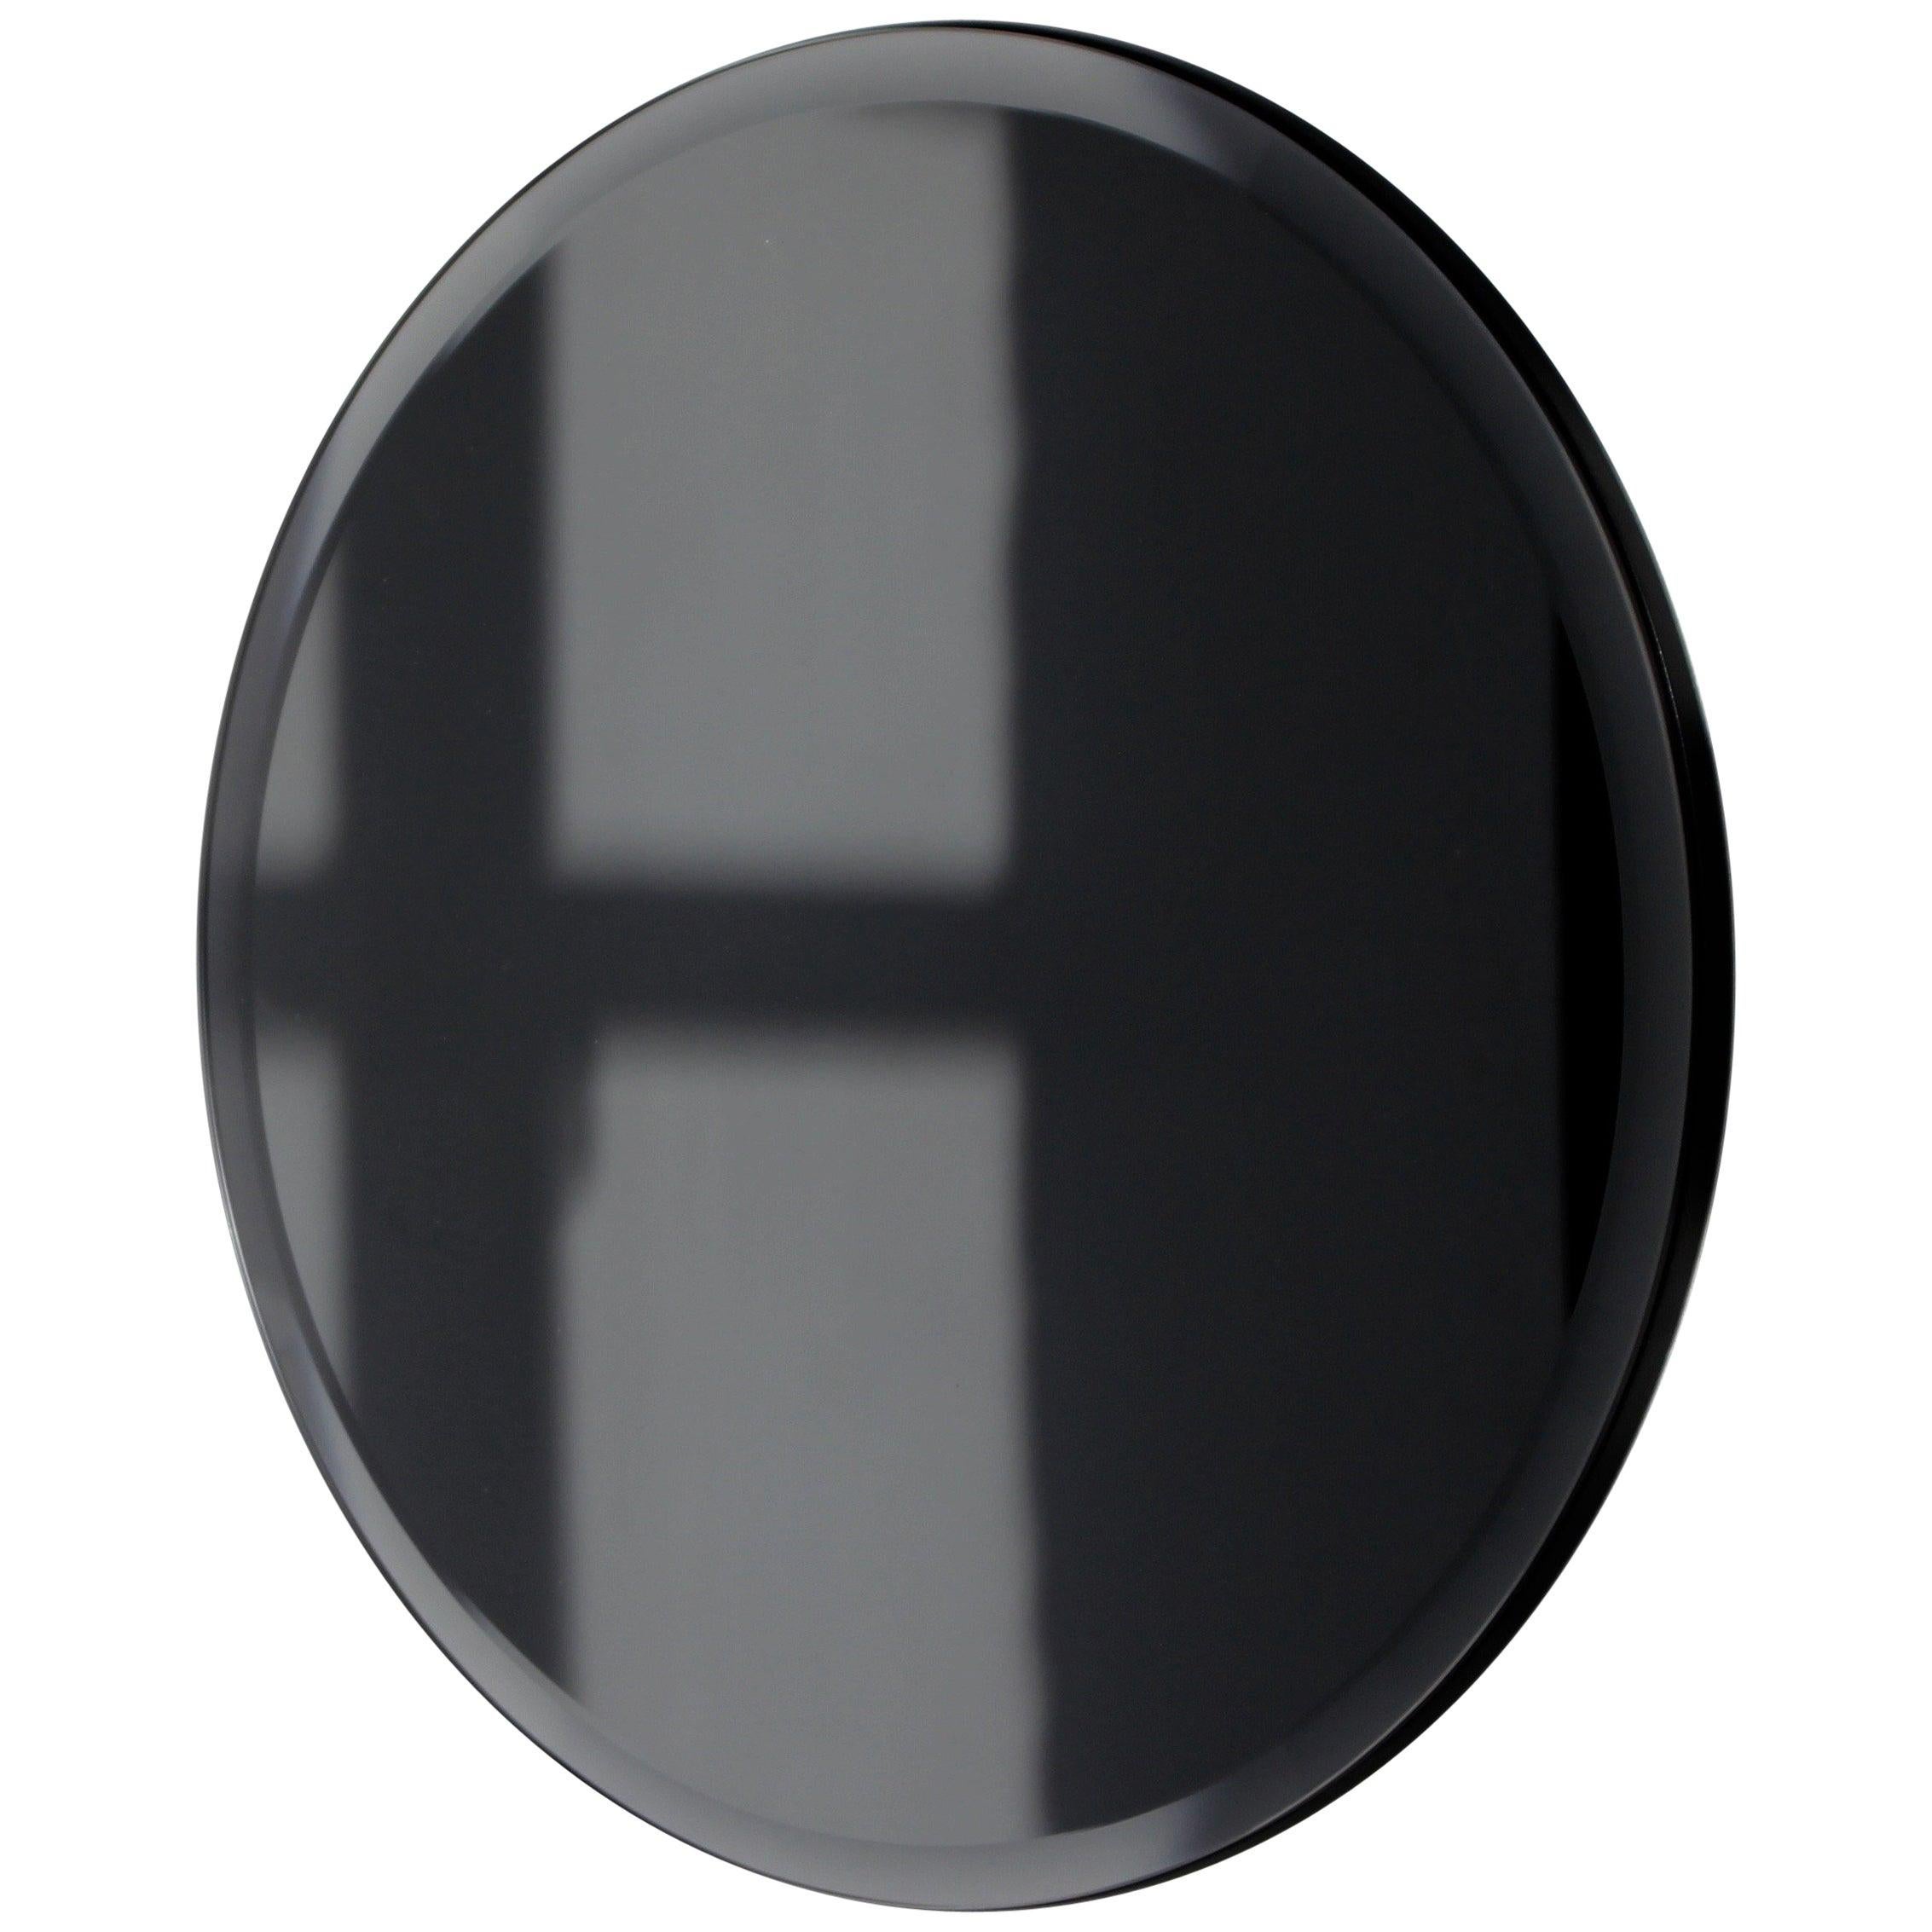 Orbis Bevelled Black Tinted Round Frameless Mirror Faux Leather Backing, Medium For Sale